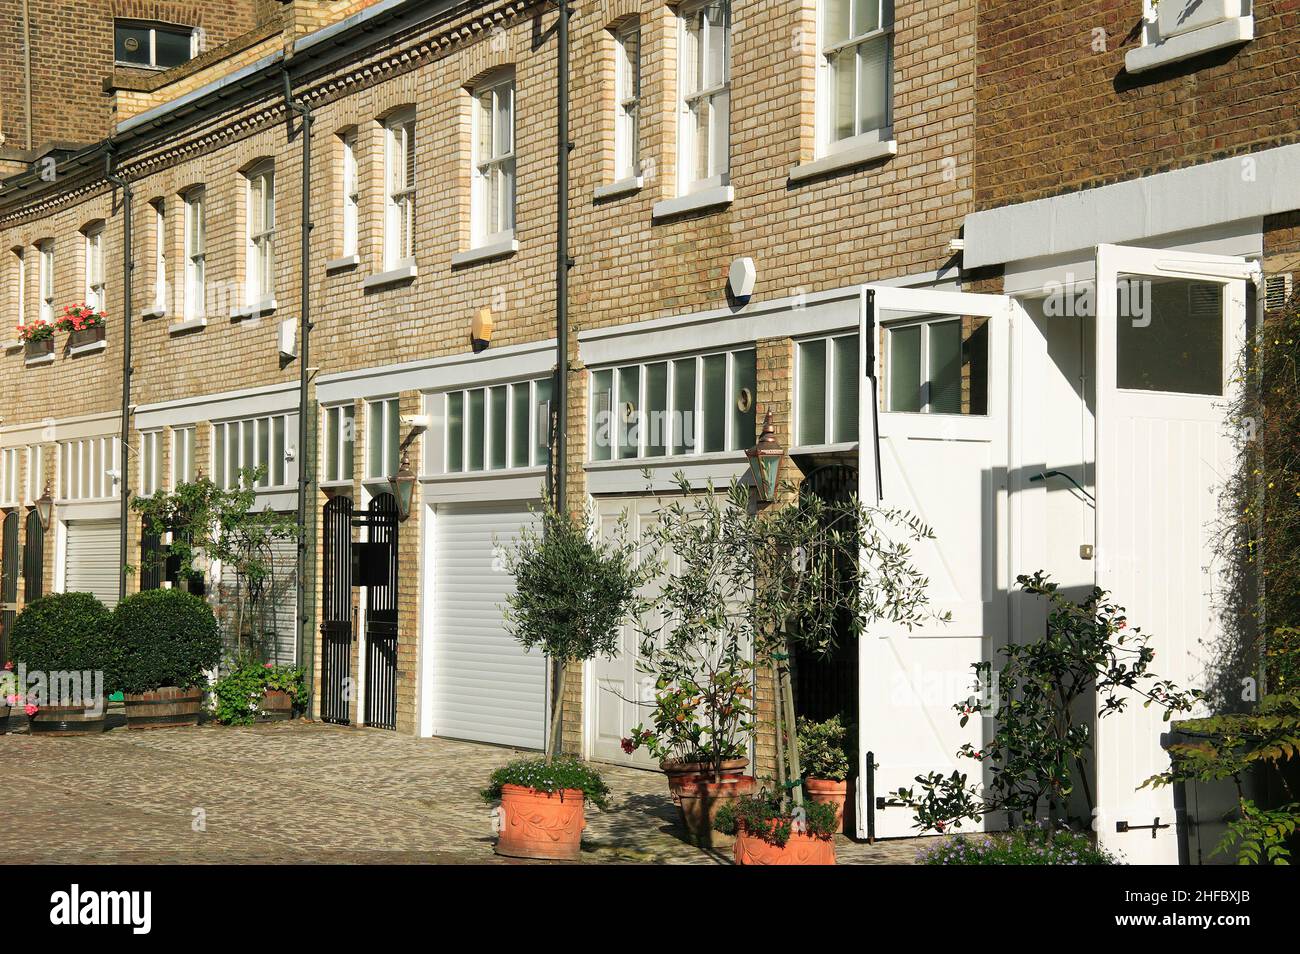 Mews house residential apartments in Marylebone London England UK which are converted buildings from old horse stables, stock photo image Stock Photo